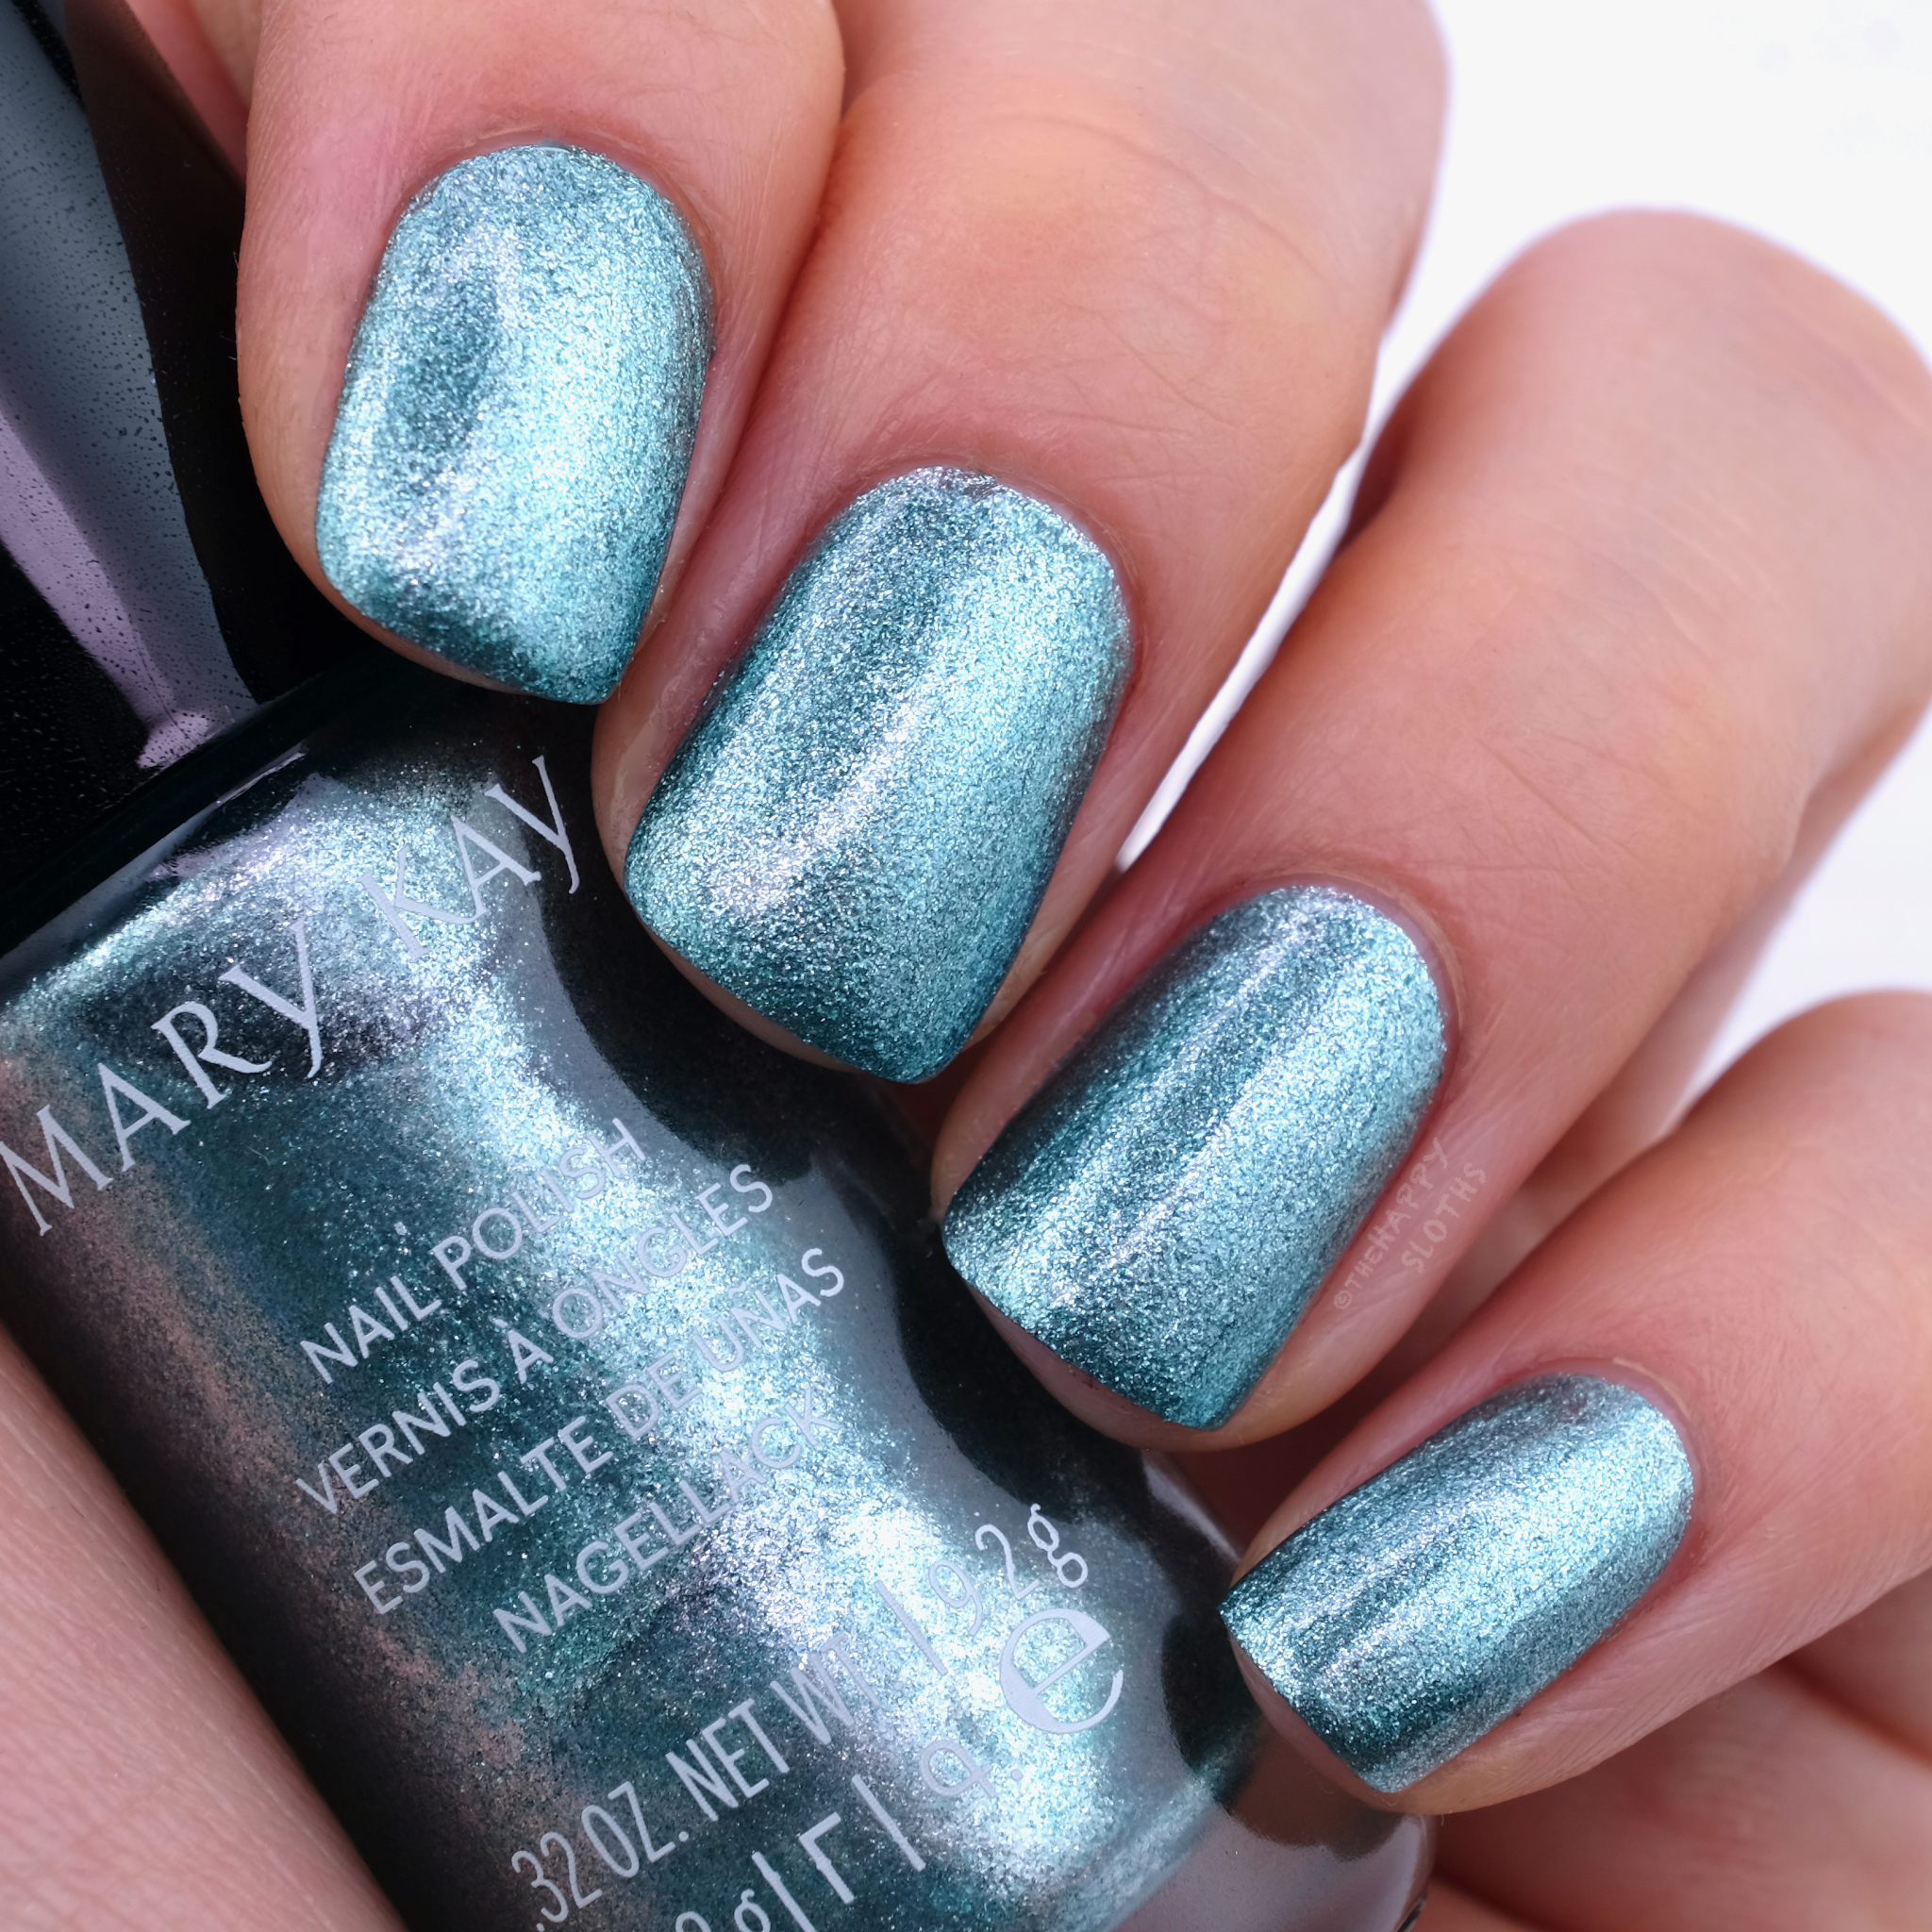 Mary Kay Fall 2021 | Nail Polish in "Emerald": Review and Swatches